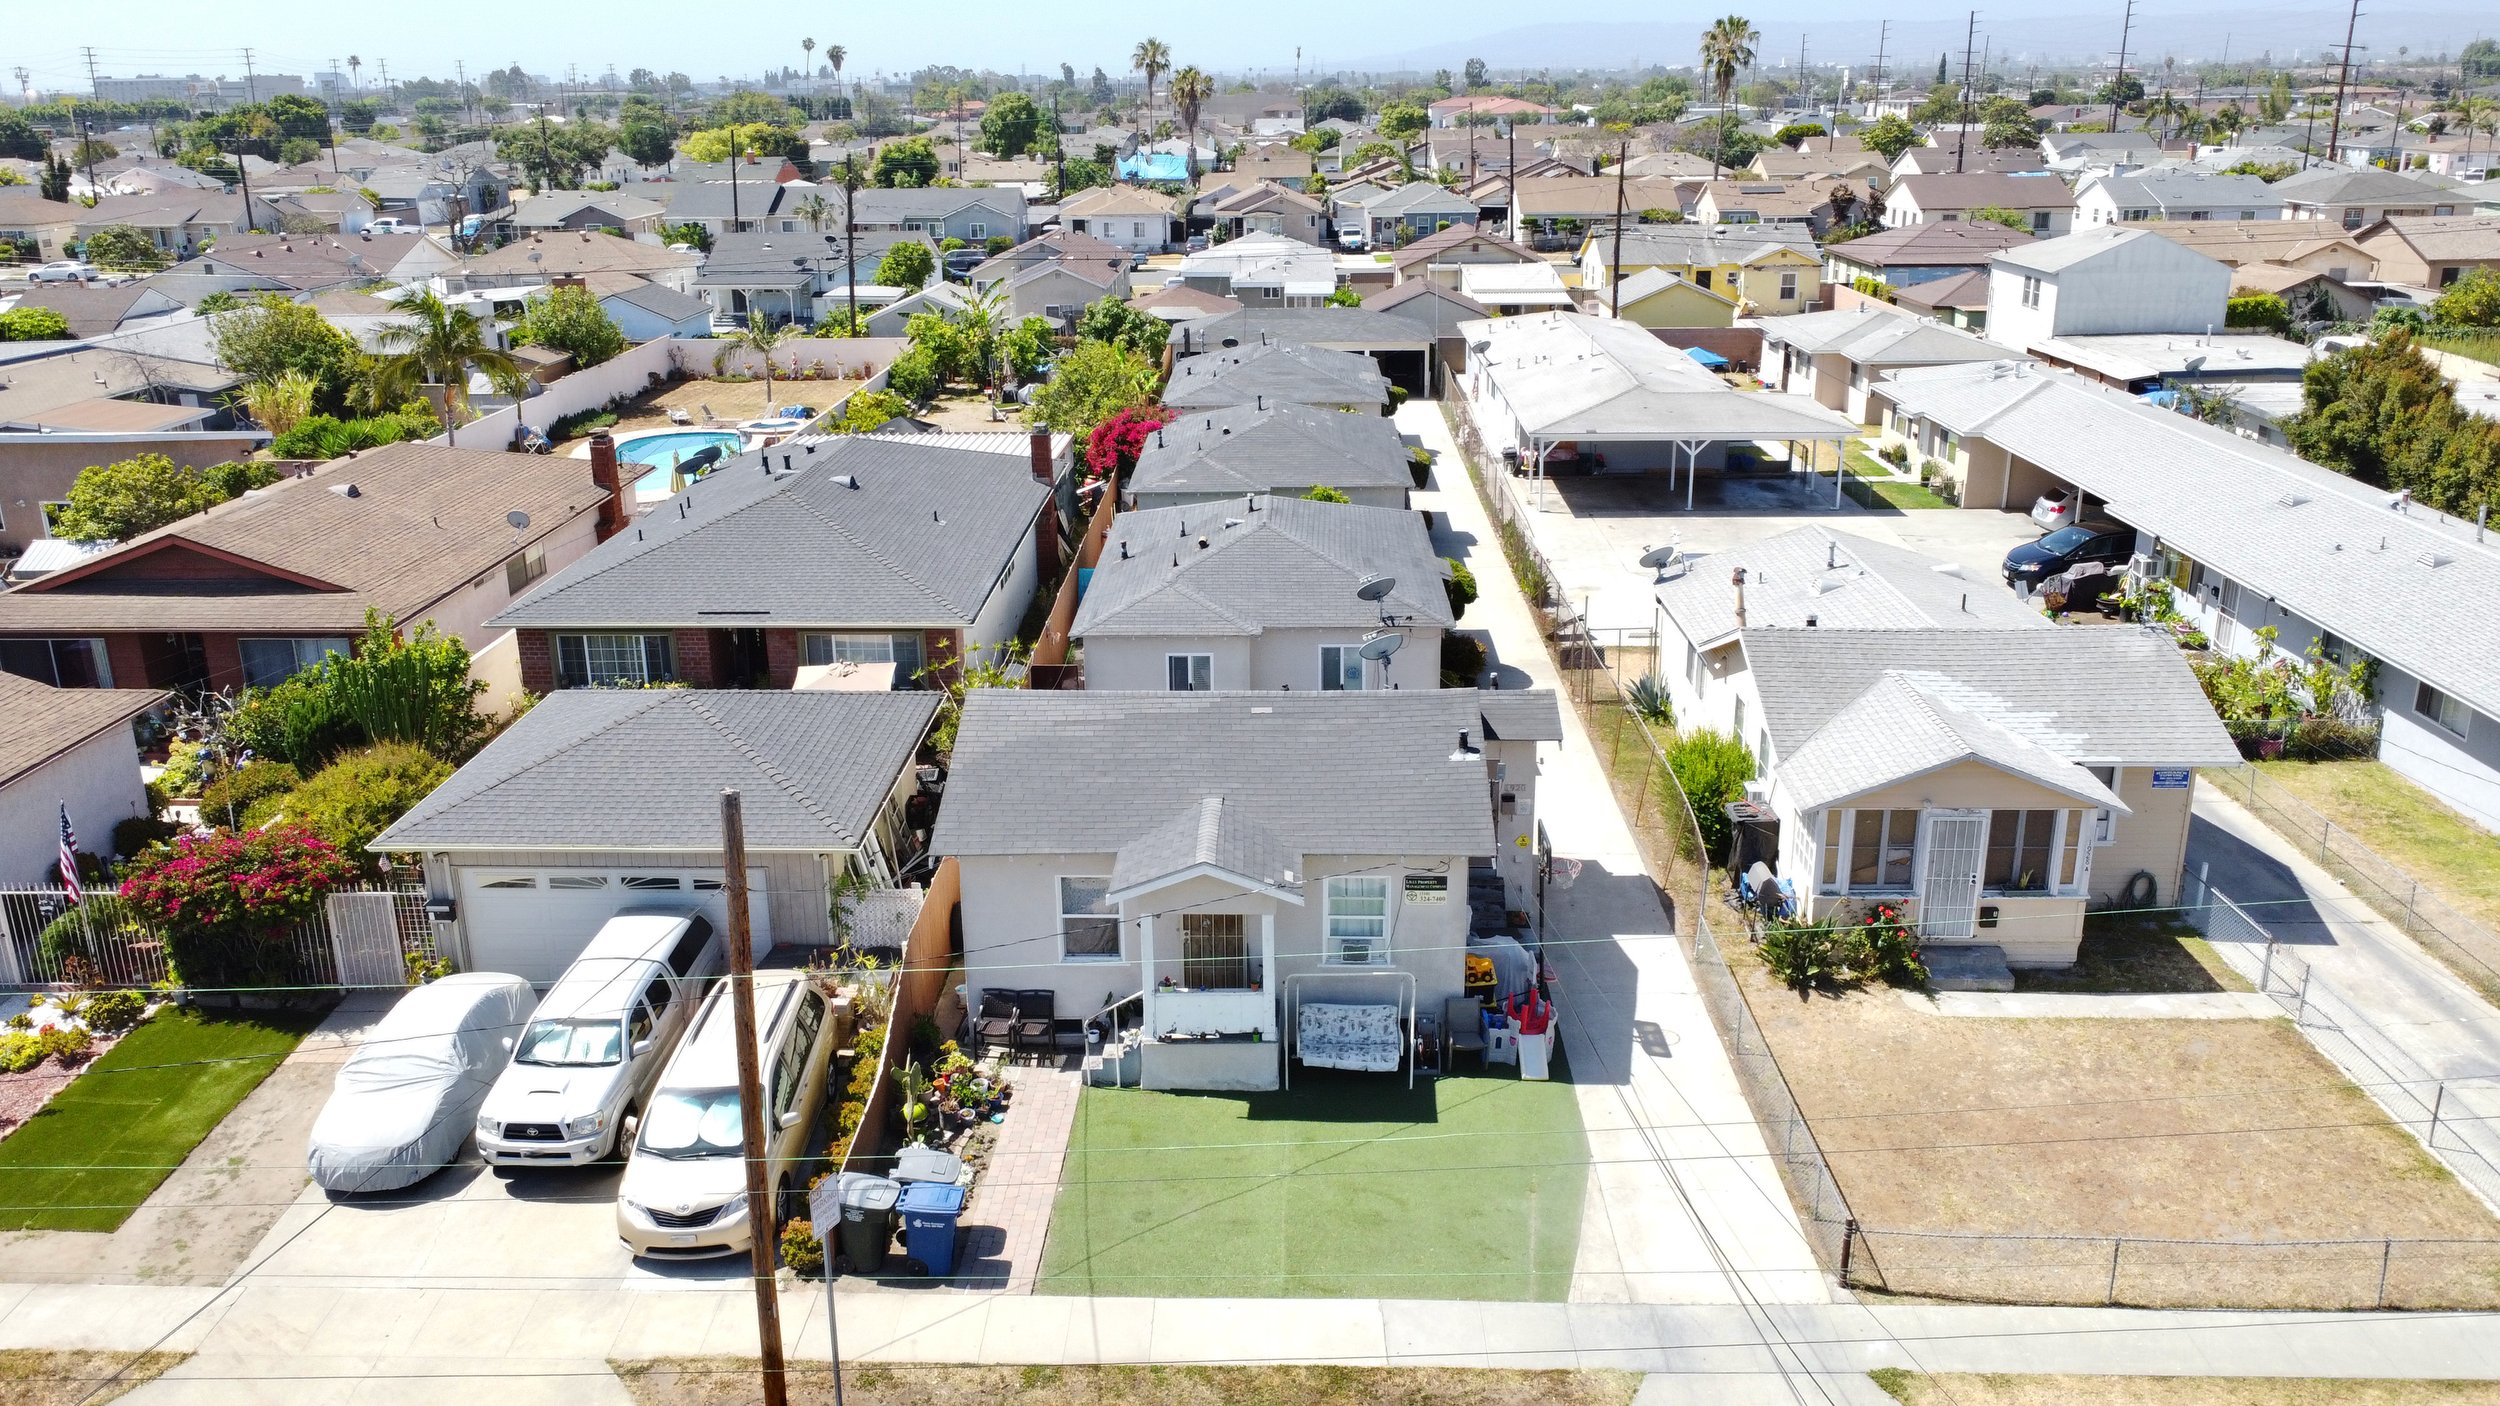 Bird’s-eye view of a suburban street with houses, lawns, and cars.